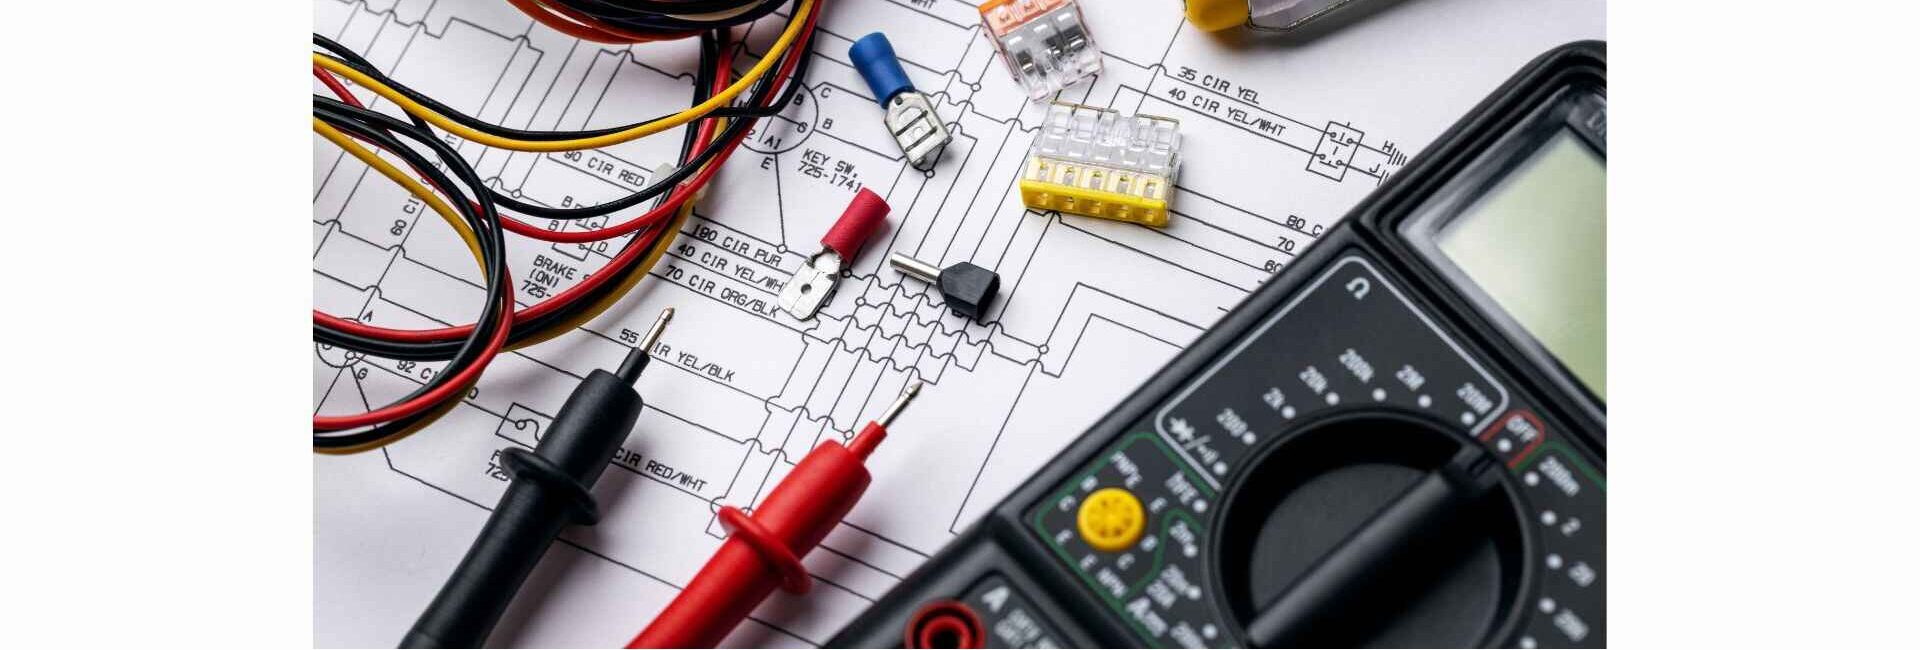 Dev Electricals- electrical safety inspections in Noida